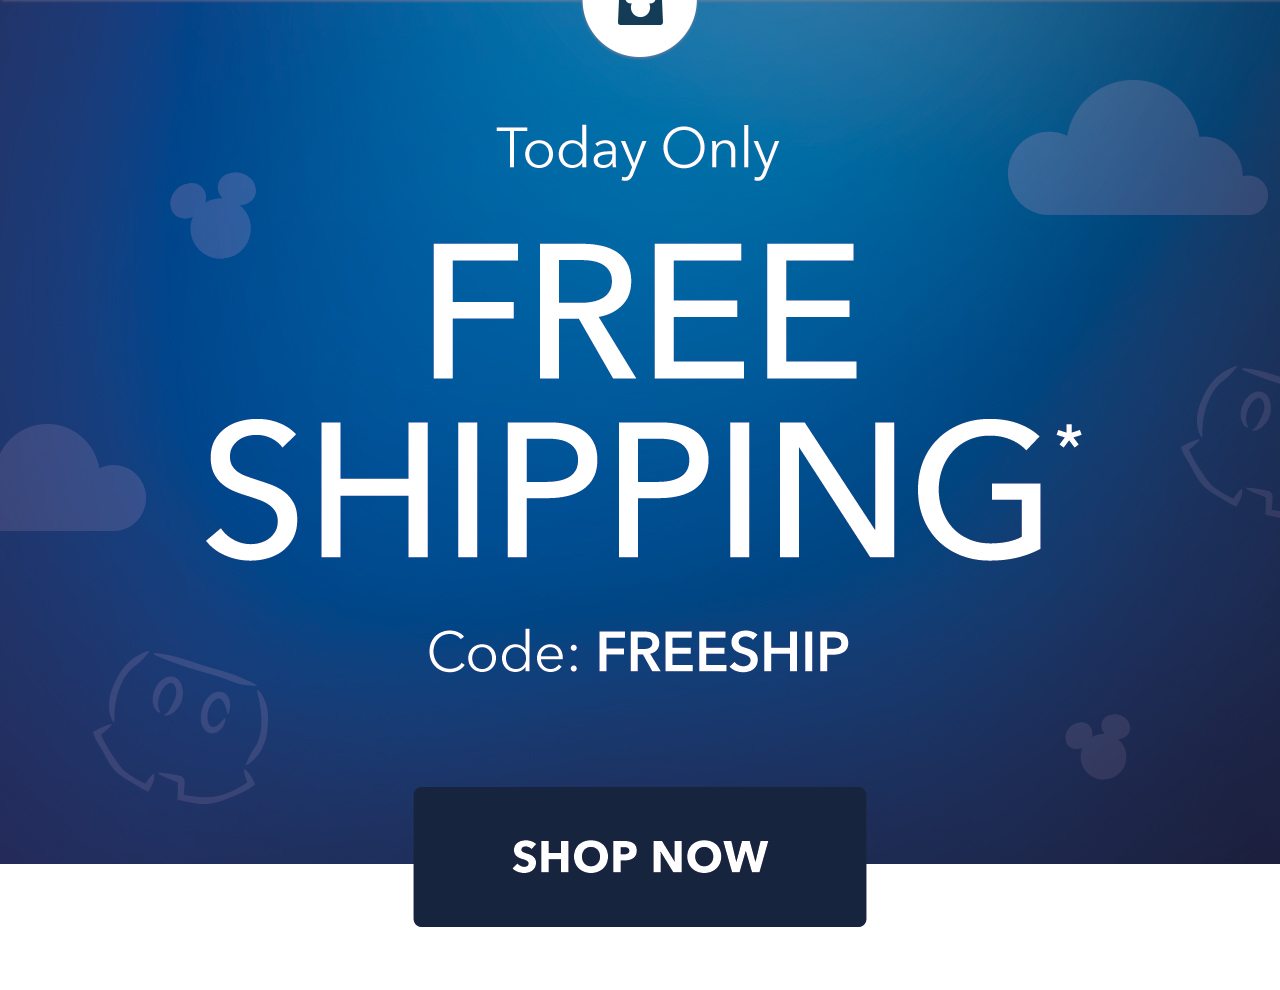 FREE SHIPPING Today Only! Code: FREESHIP | SHOP NOW